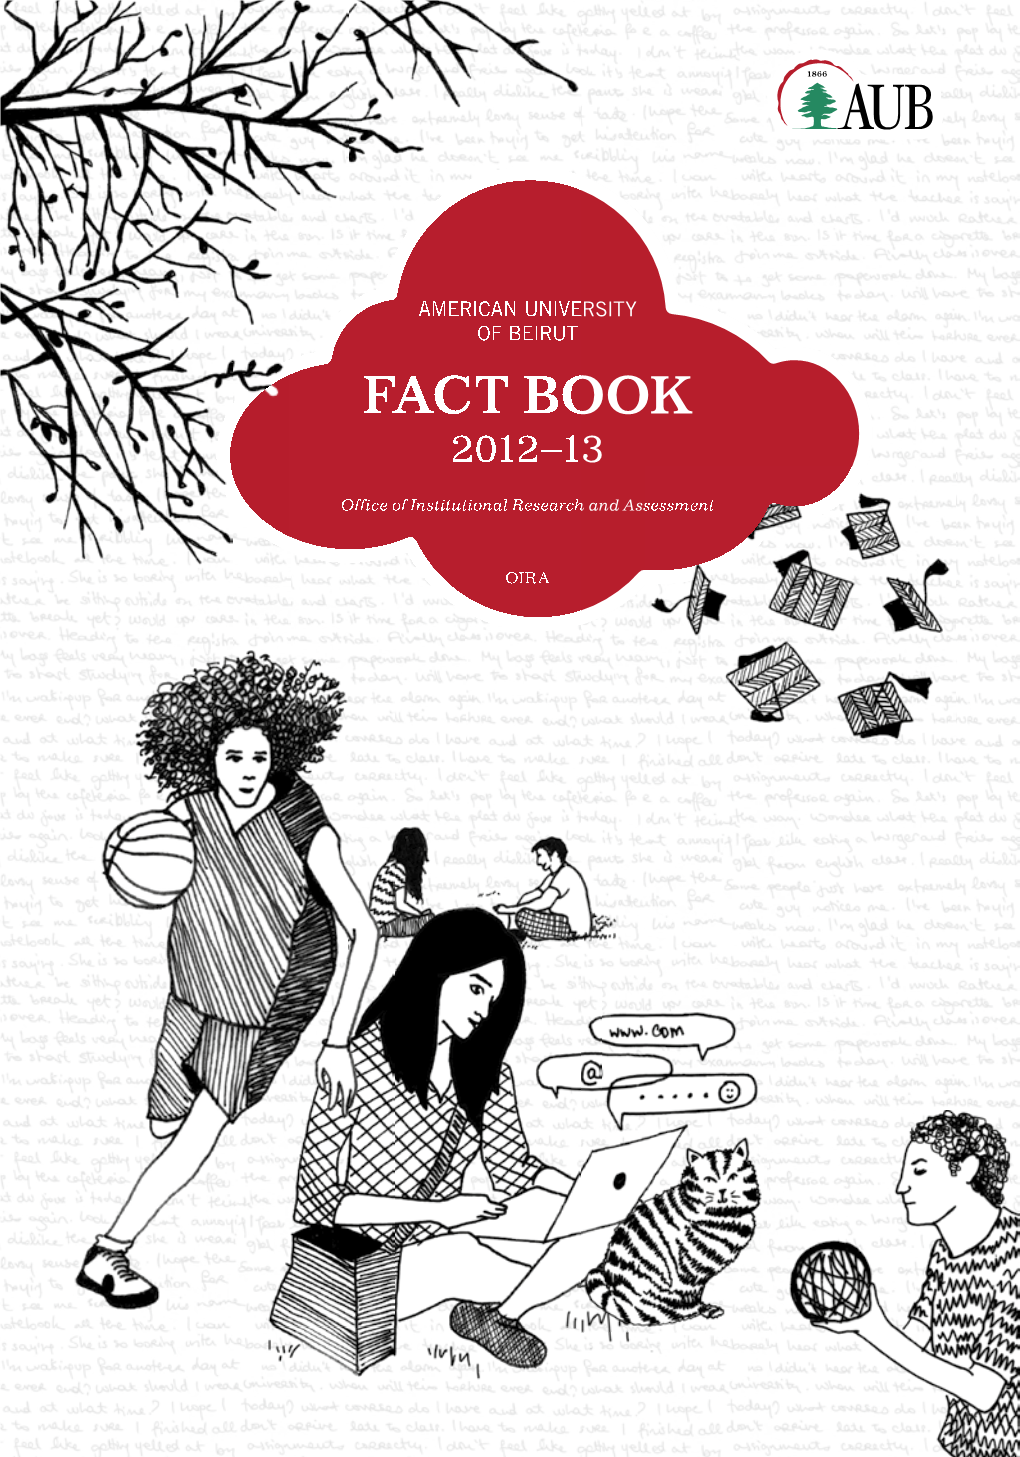 FACT BOOK Tel: +961 1 350 000 Or +961 1 374 374, Ext